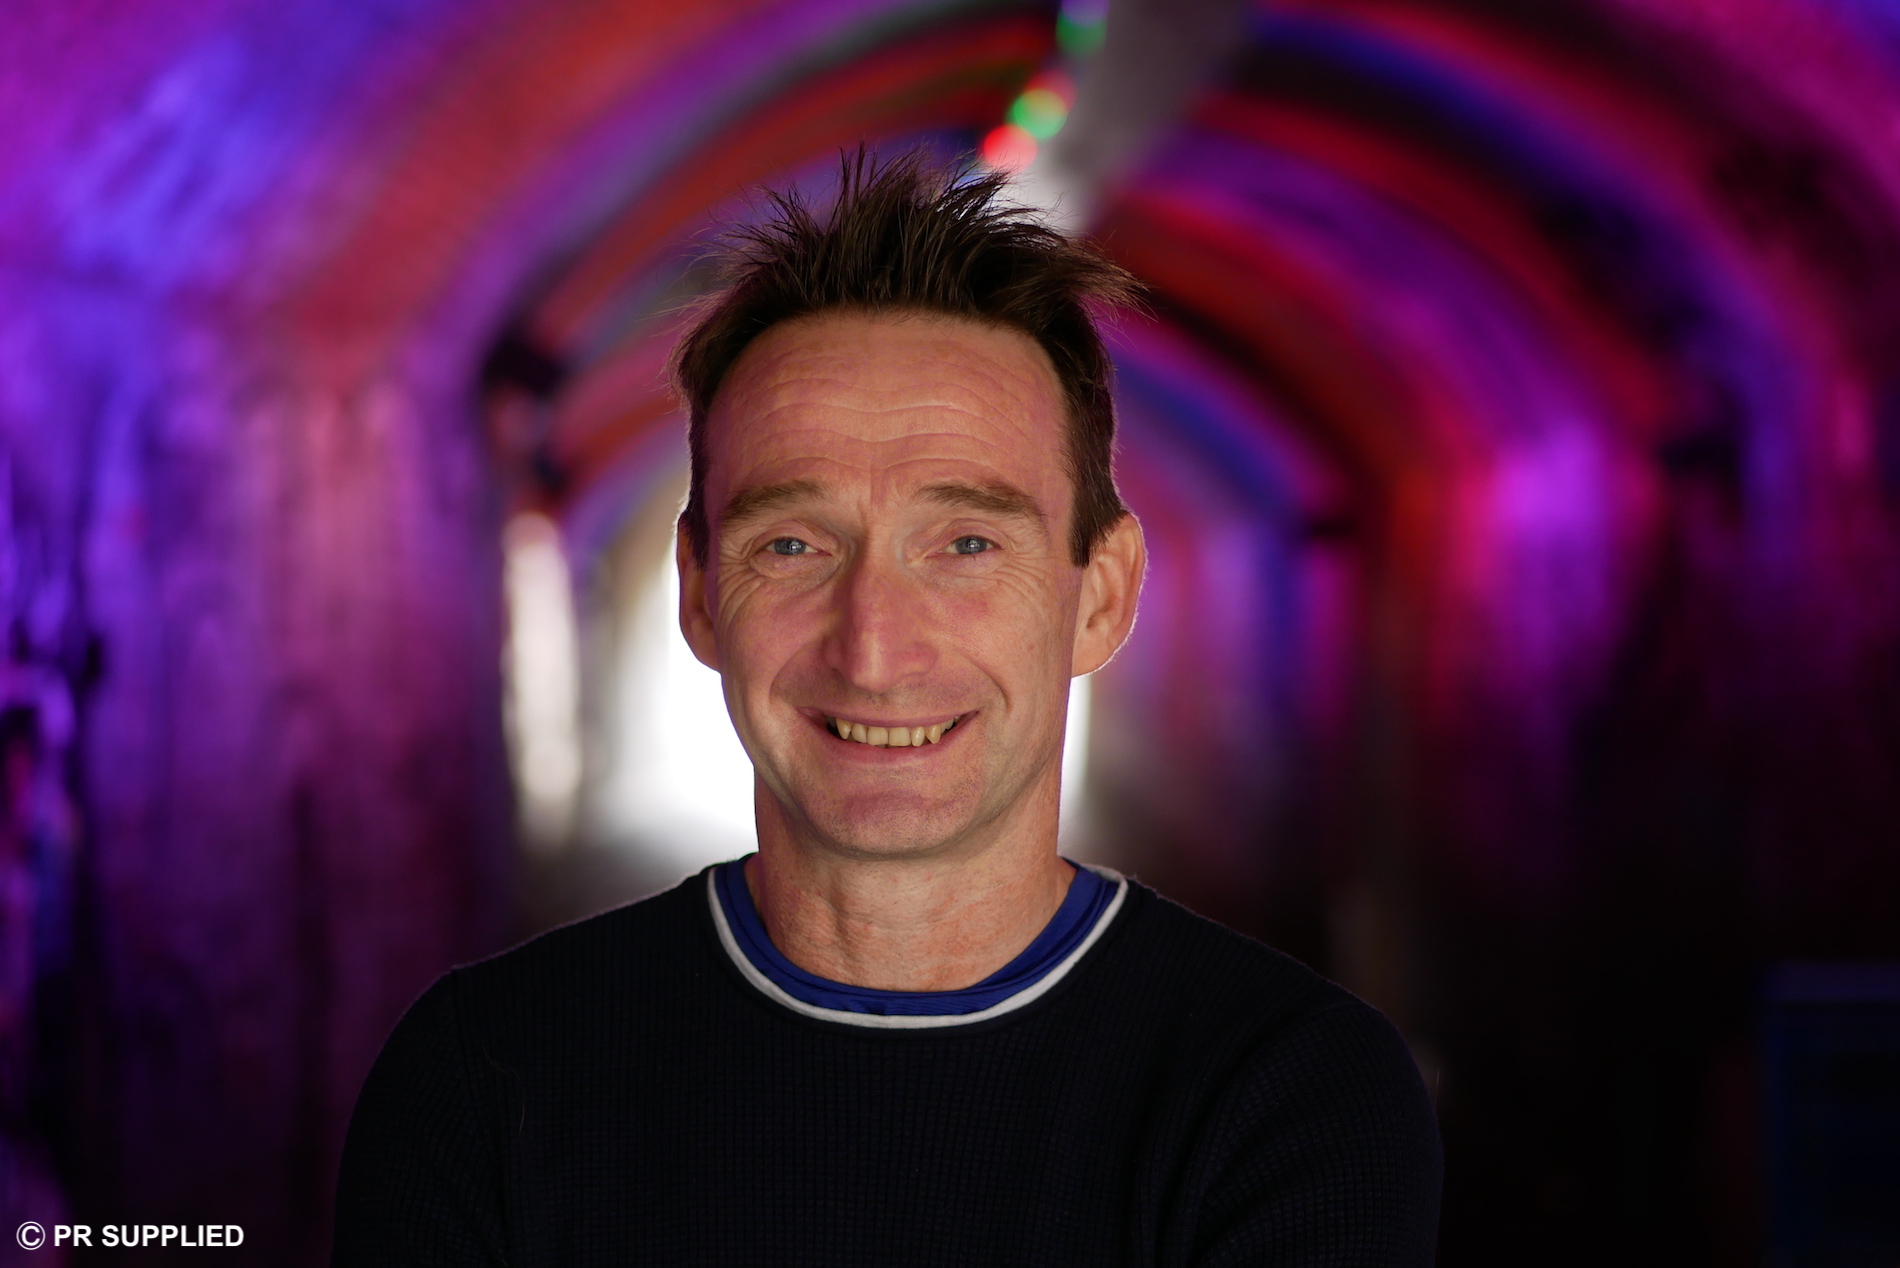 John Leech shortlisted for ‘Lifetime Achievement’ award for “pushing the envelope as far as possible for the LGBTQ+ community”